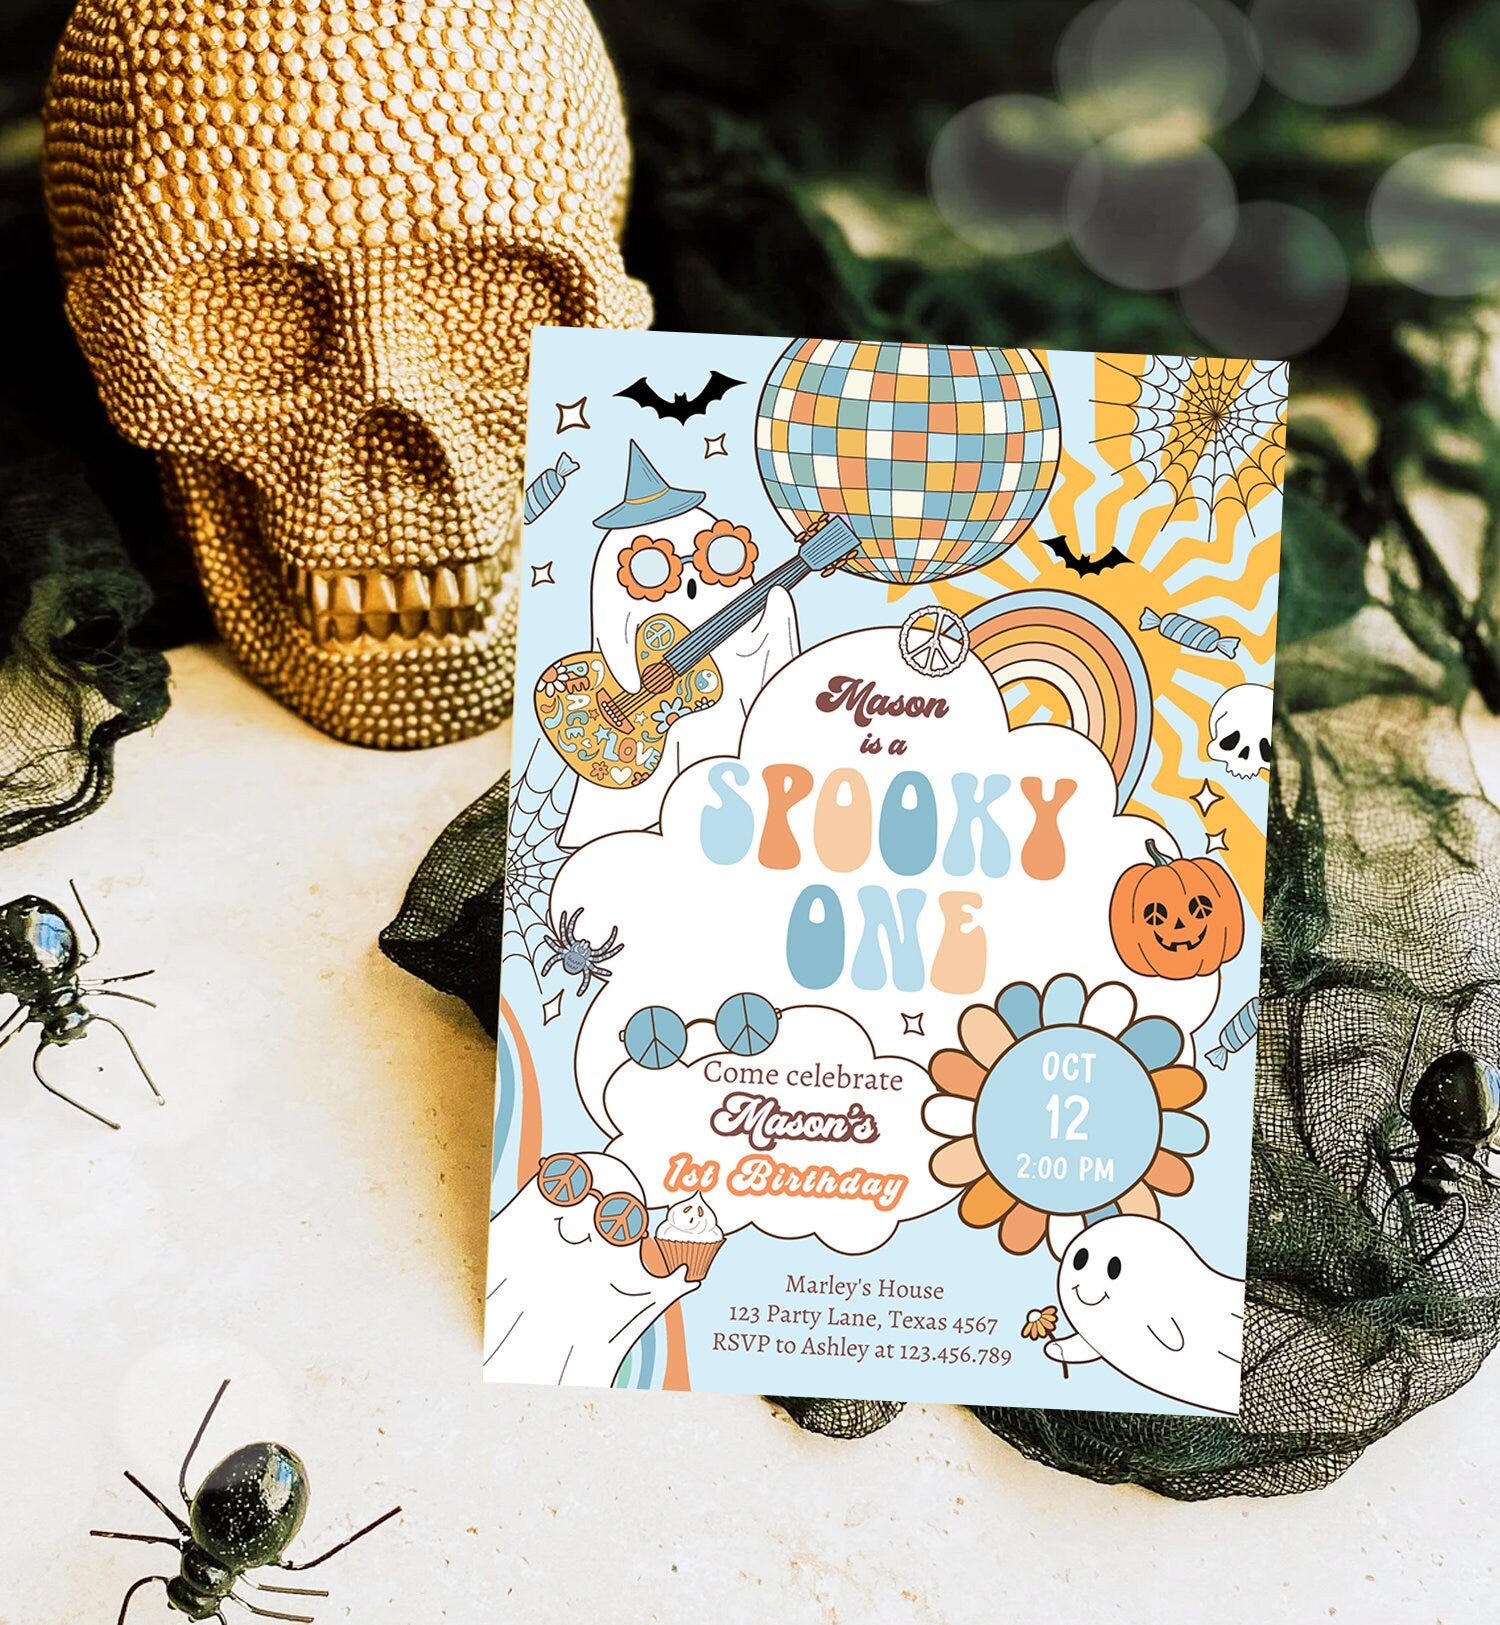 Editable Groovy Halloween 1st Birthday Invitation Spooky One Invite Boy Blue Ghost Party Spooktacular Download Template Corjl 0471 0009